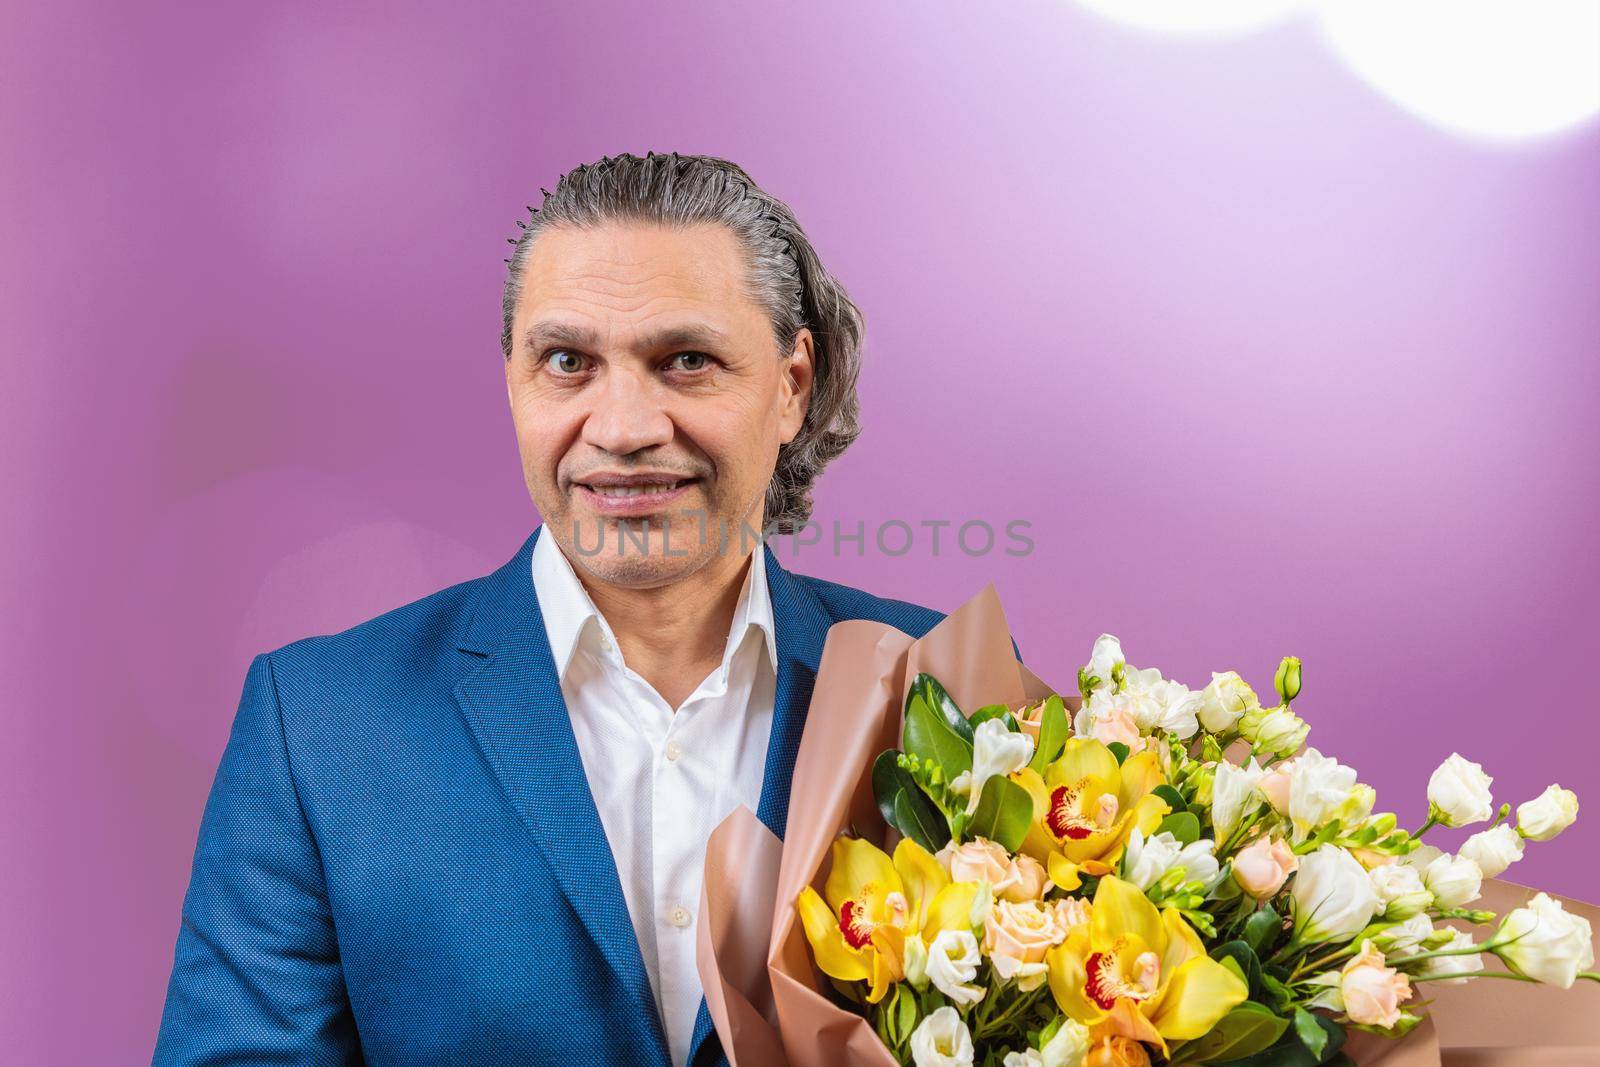 Smiling 50 year old man in suit with bouquet of flowers by Yurich32